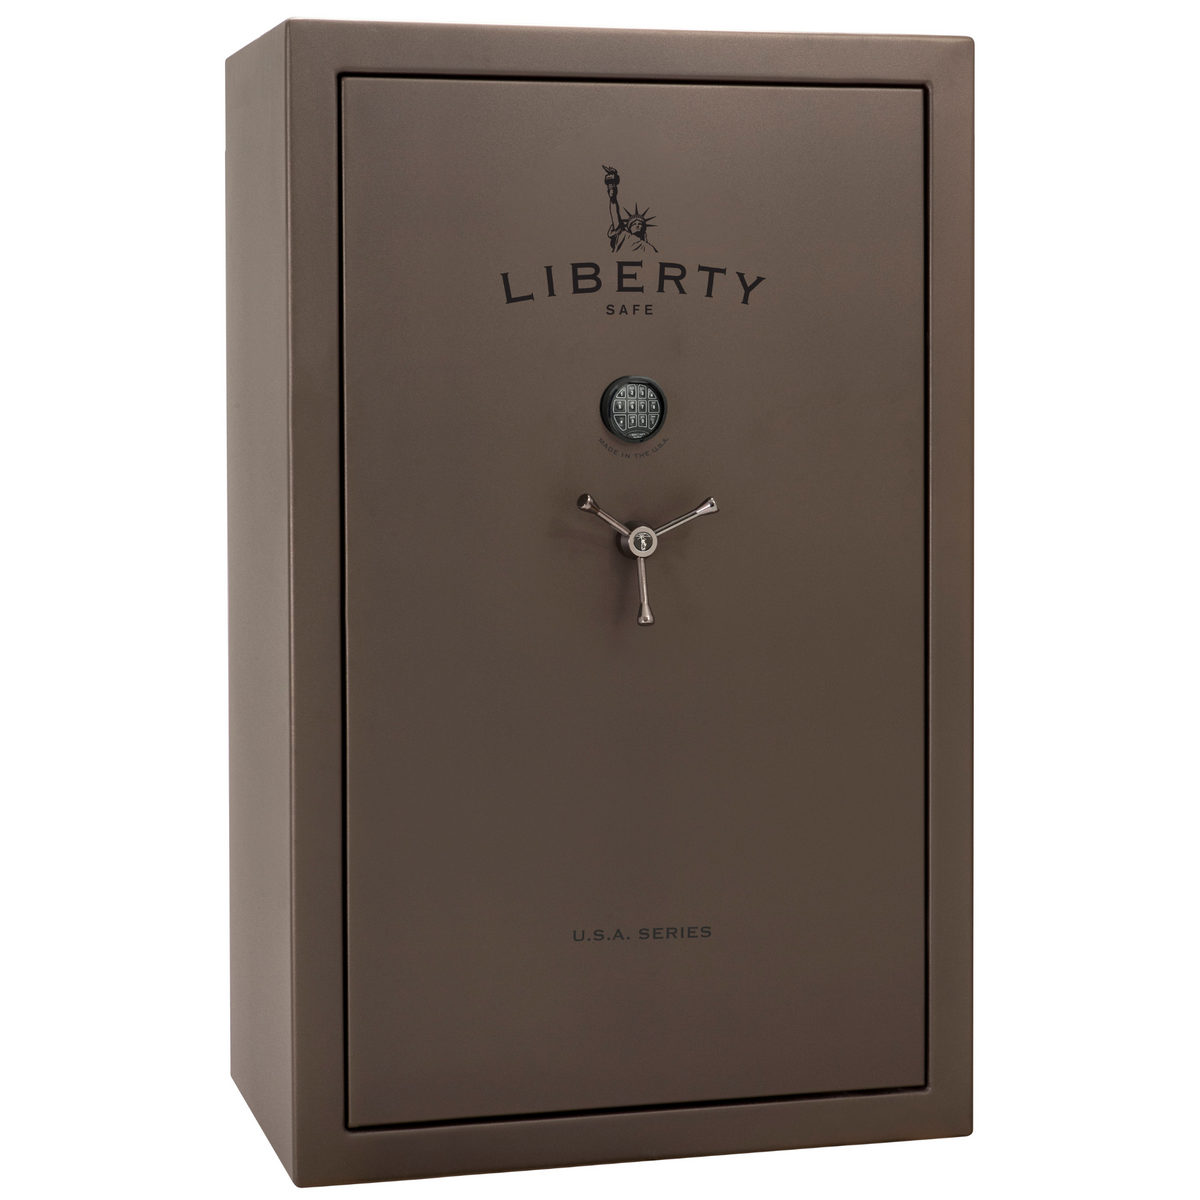 USA 48 Bronze Textured | FREE LED LIGHT KIT | Level 3 Security | 60 Minute Fire Rating